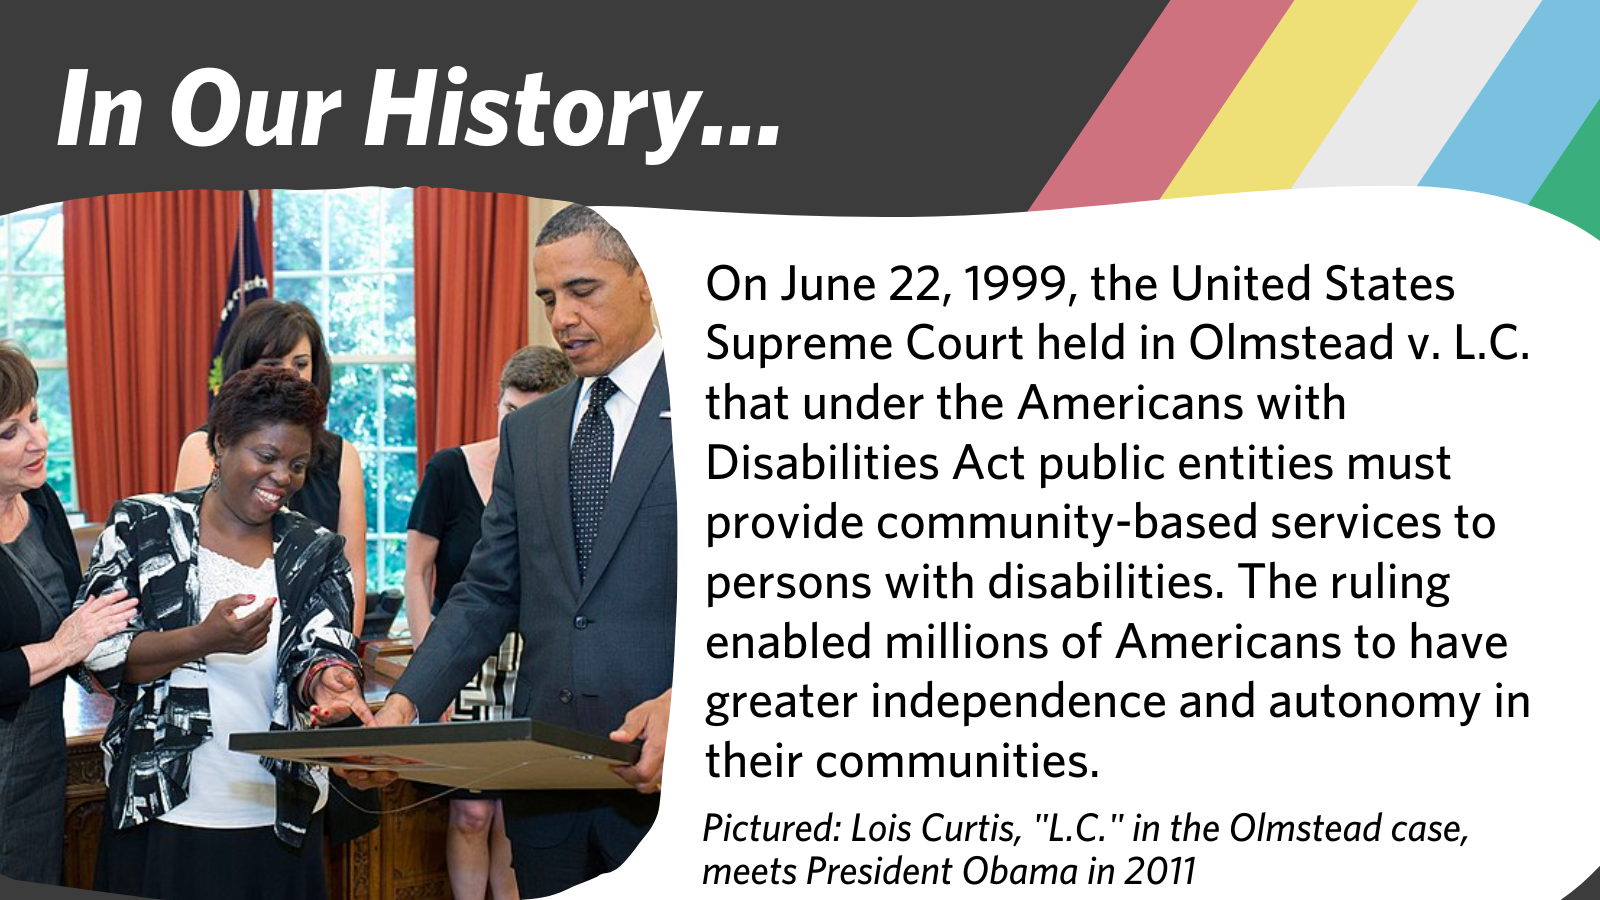 On June 22, 1999, the United States Supreme Court held in Olmstead v. L.C. that under the Americans with Disabilities Act public entities must provide community-based services to persons with disabilities